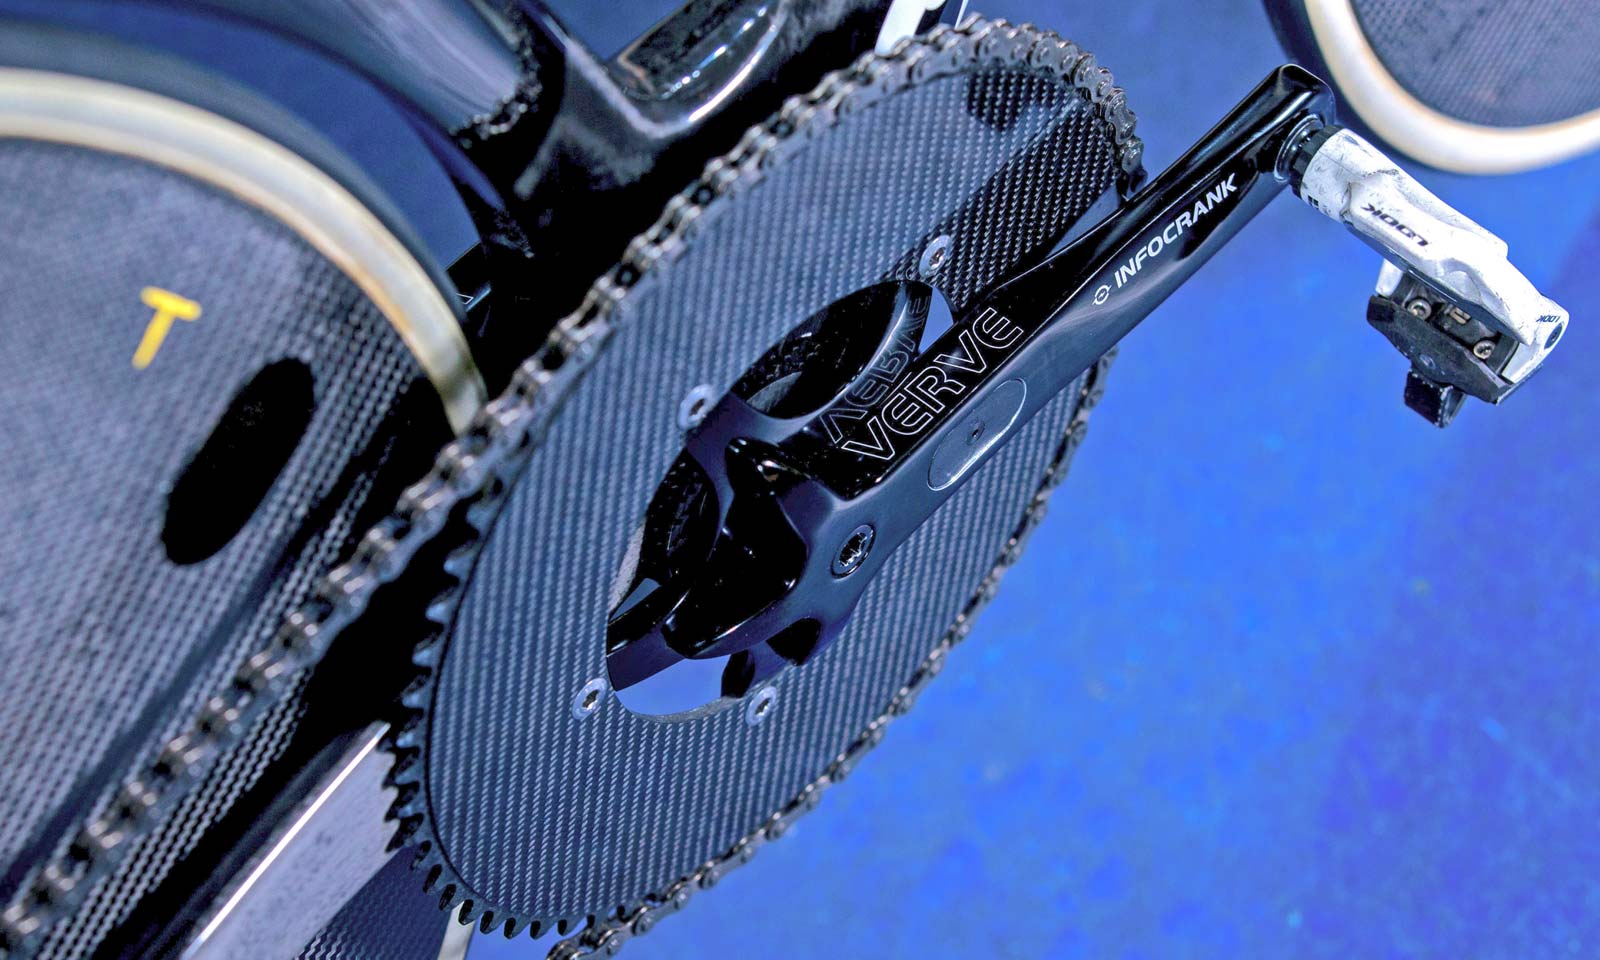 InfoCrank hits the boards with first Track-specific power meter crankset